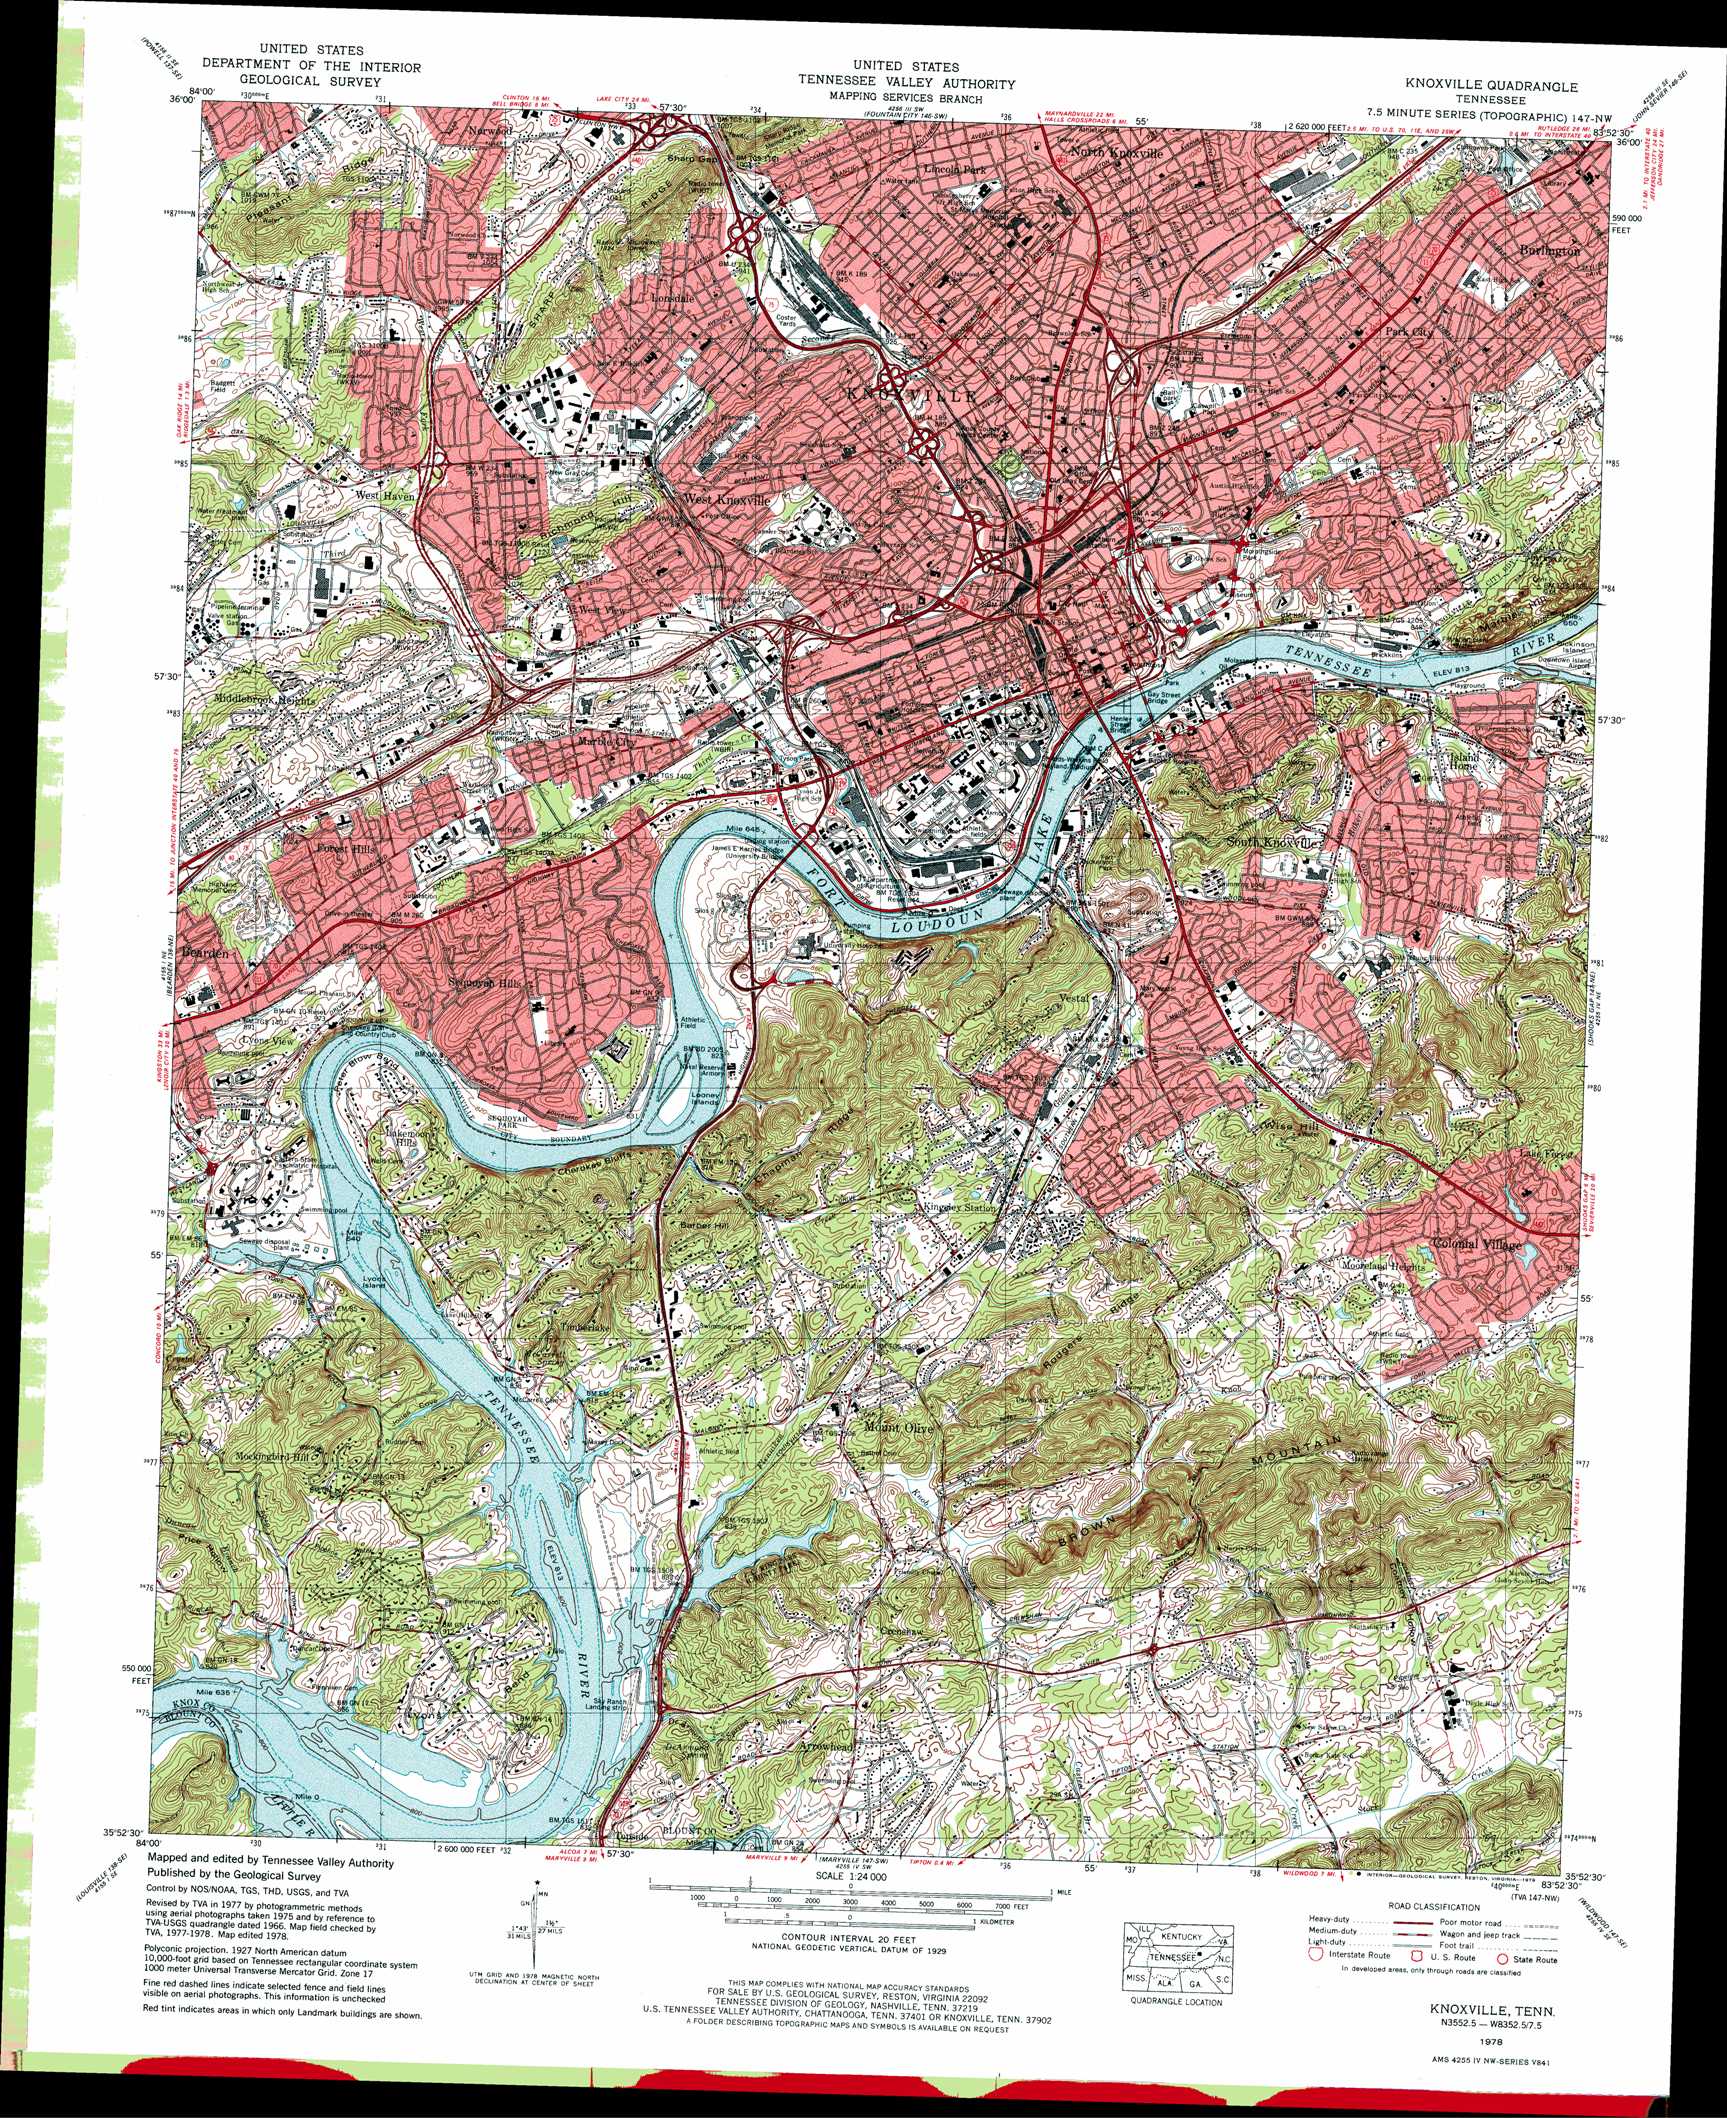 Knoxville topographic map, TN - USGS Topo Quad 35083h8